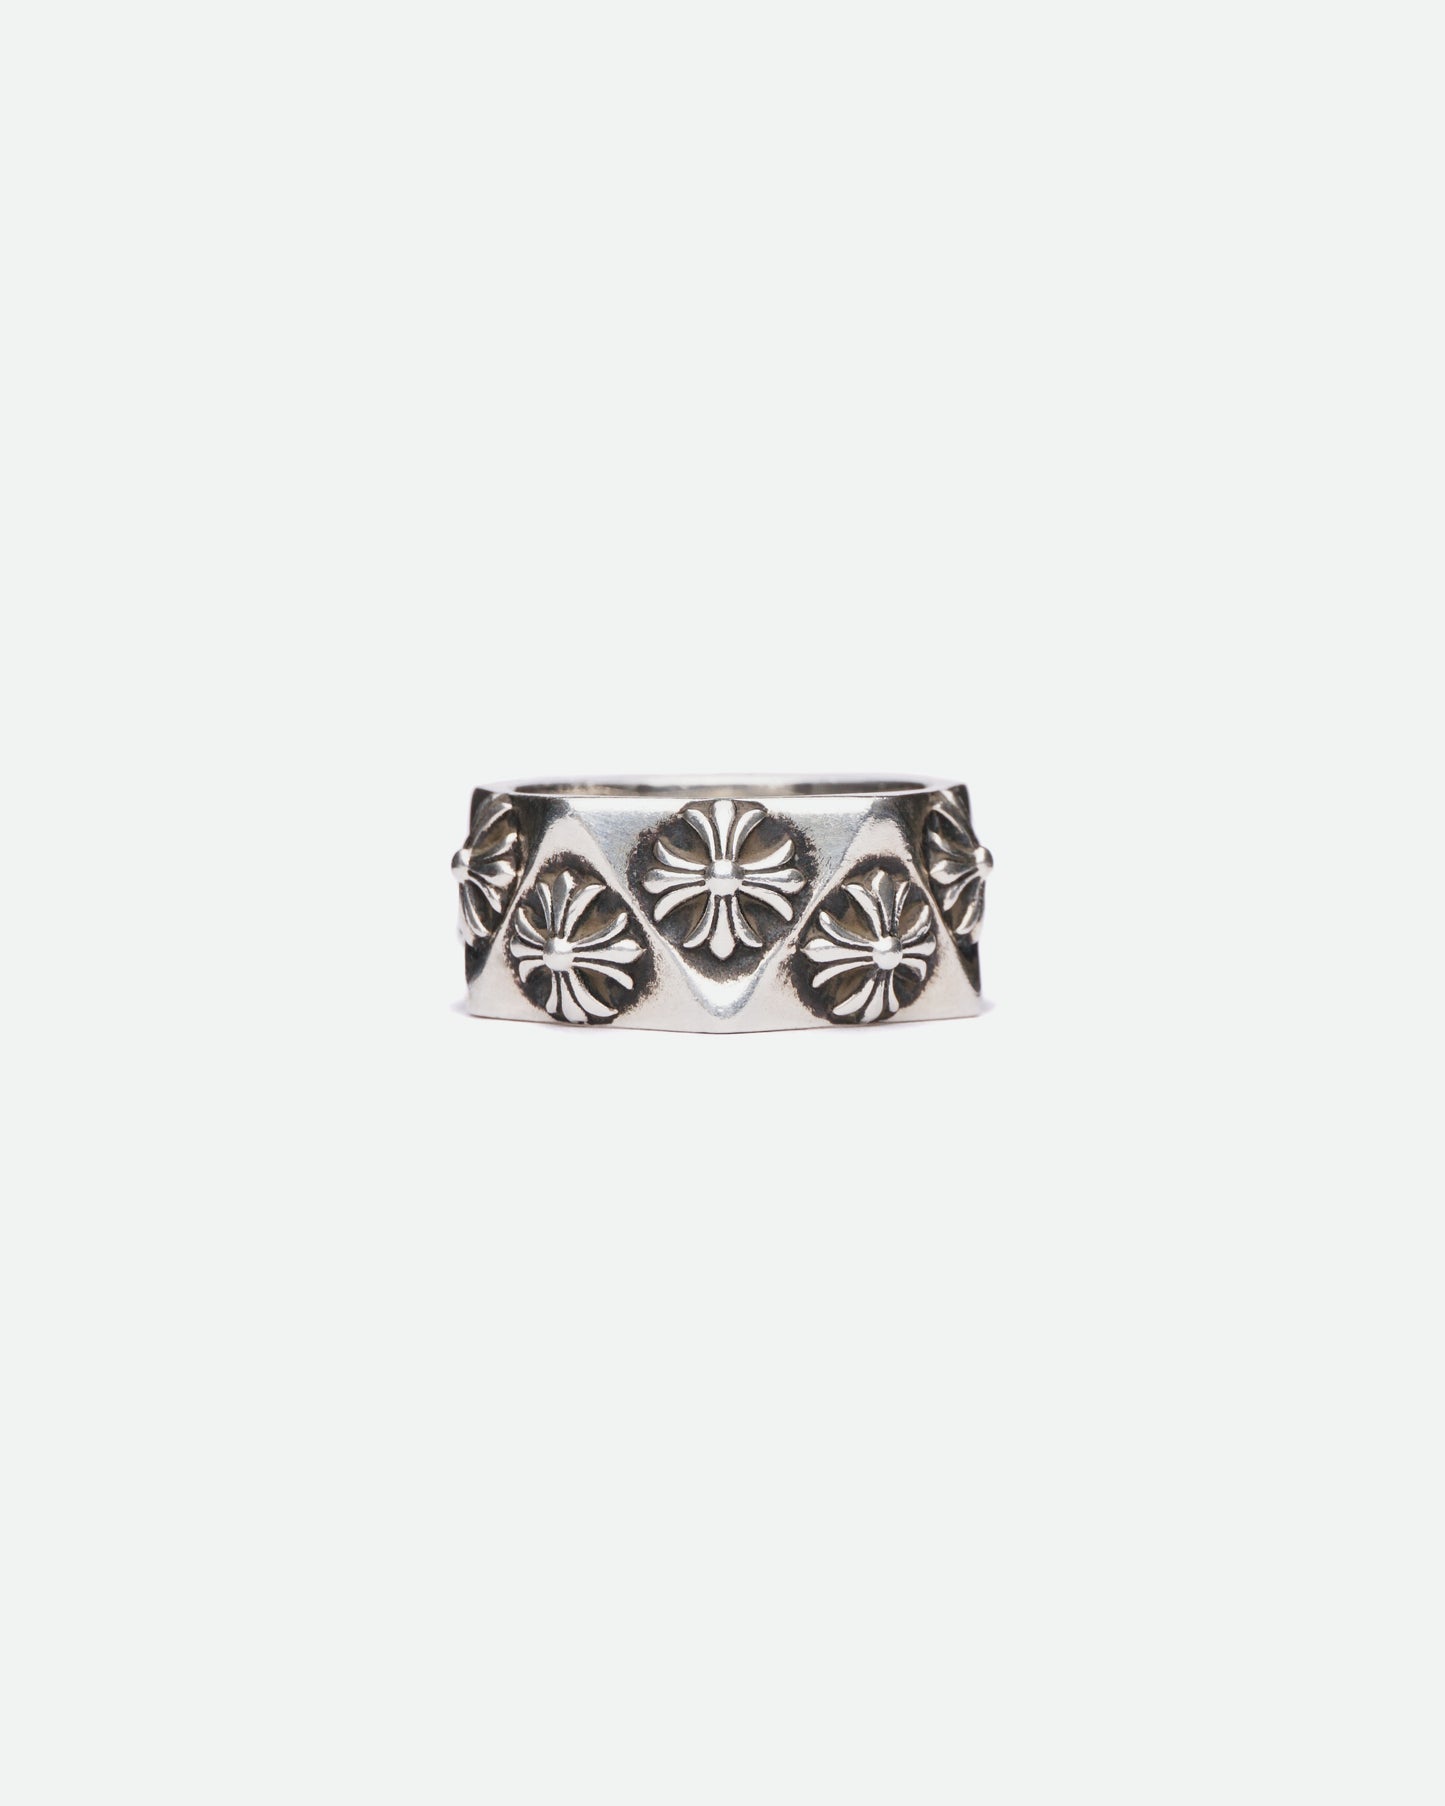 There is a Chrome Hearts Pentagon Plus Ring on white background pictured froom the front. 